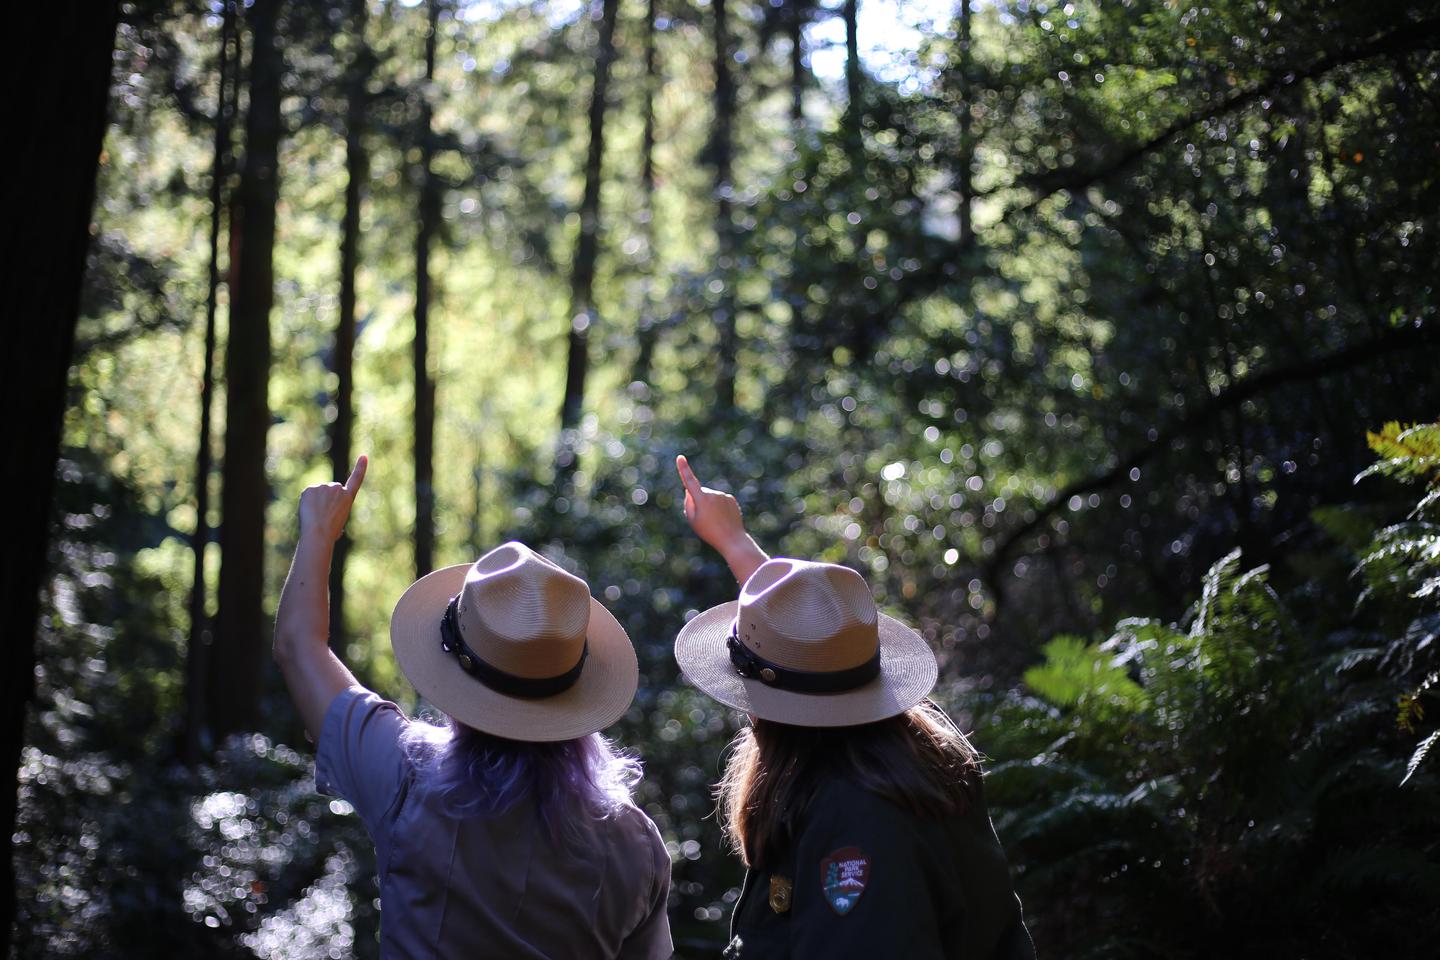 rangers pointing at redwoodsRangers are always available at Muir Woods to welcome visitors, answer questions, and provide orientation.